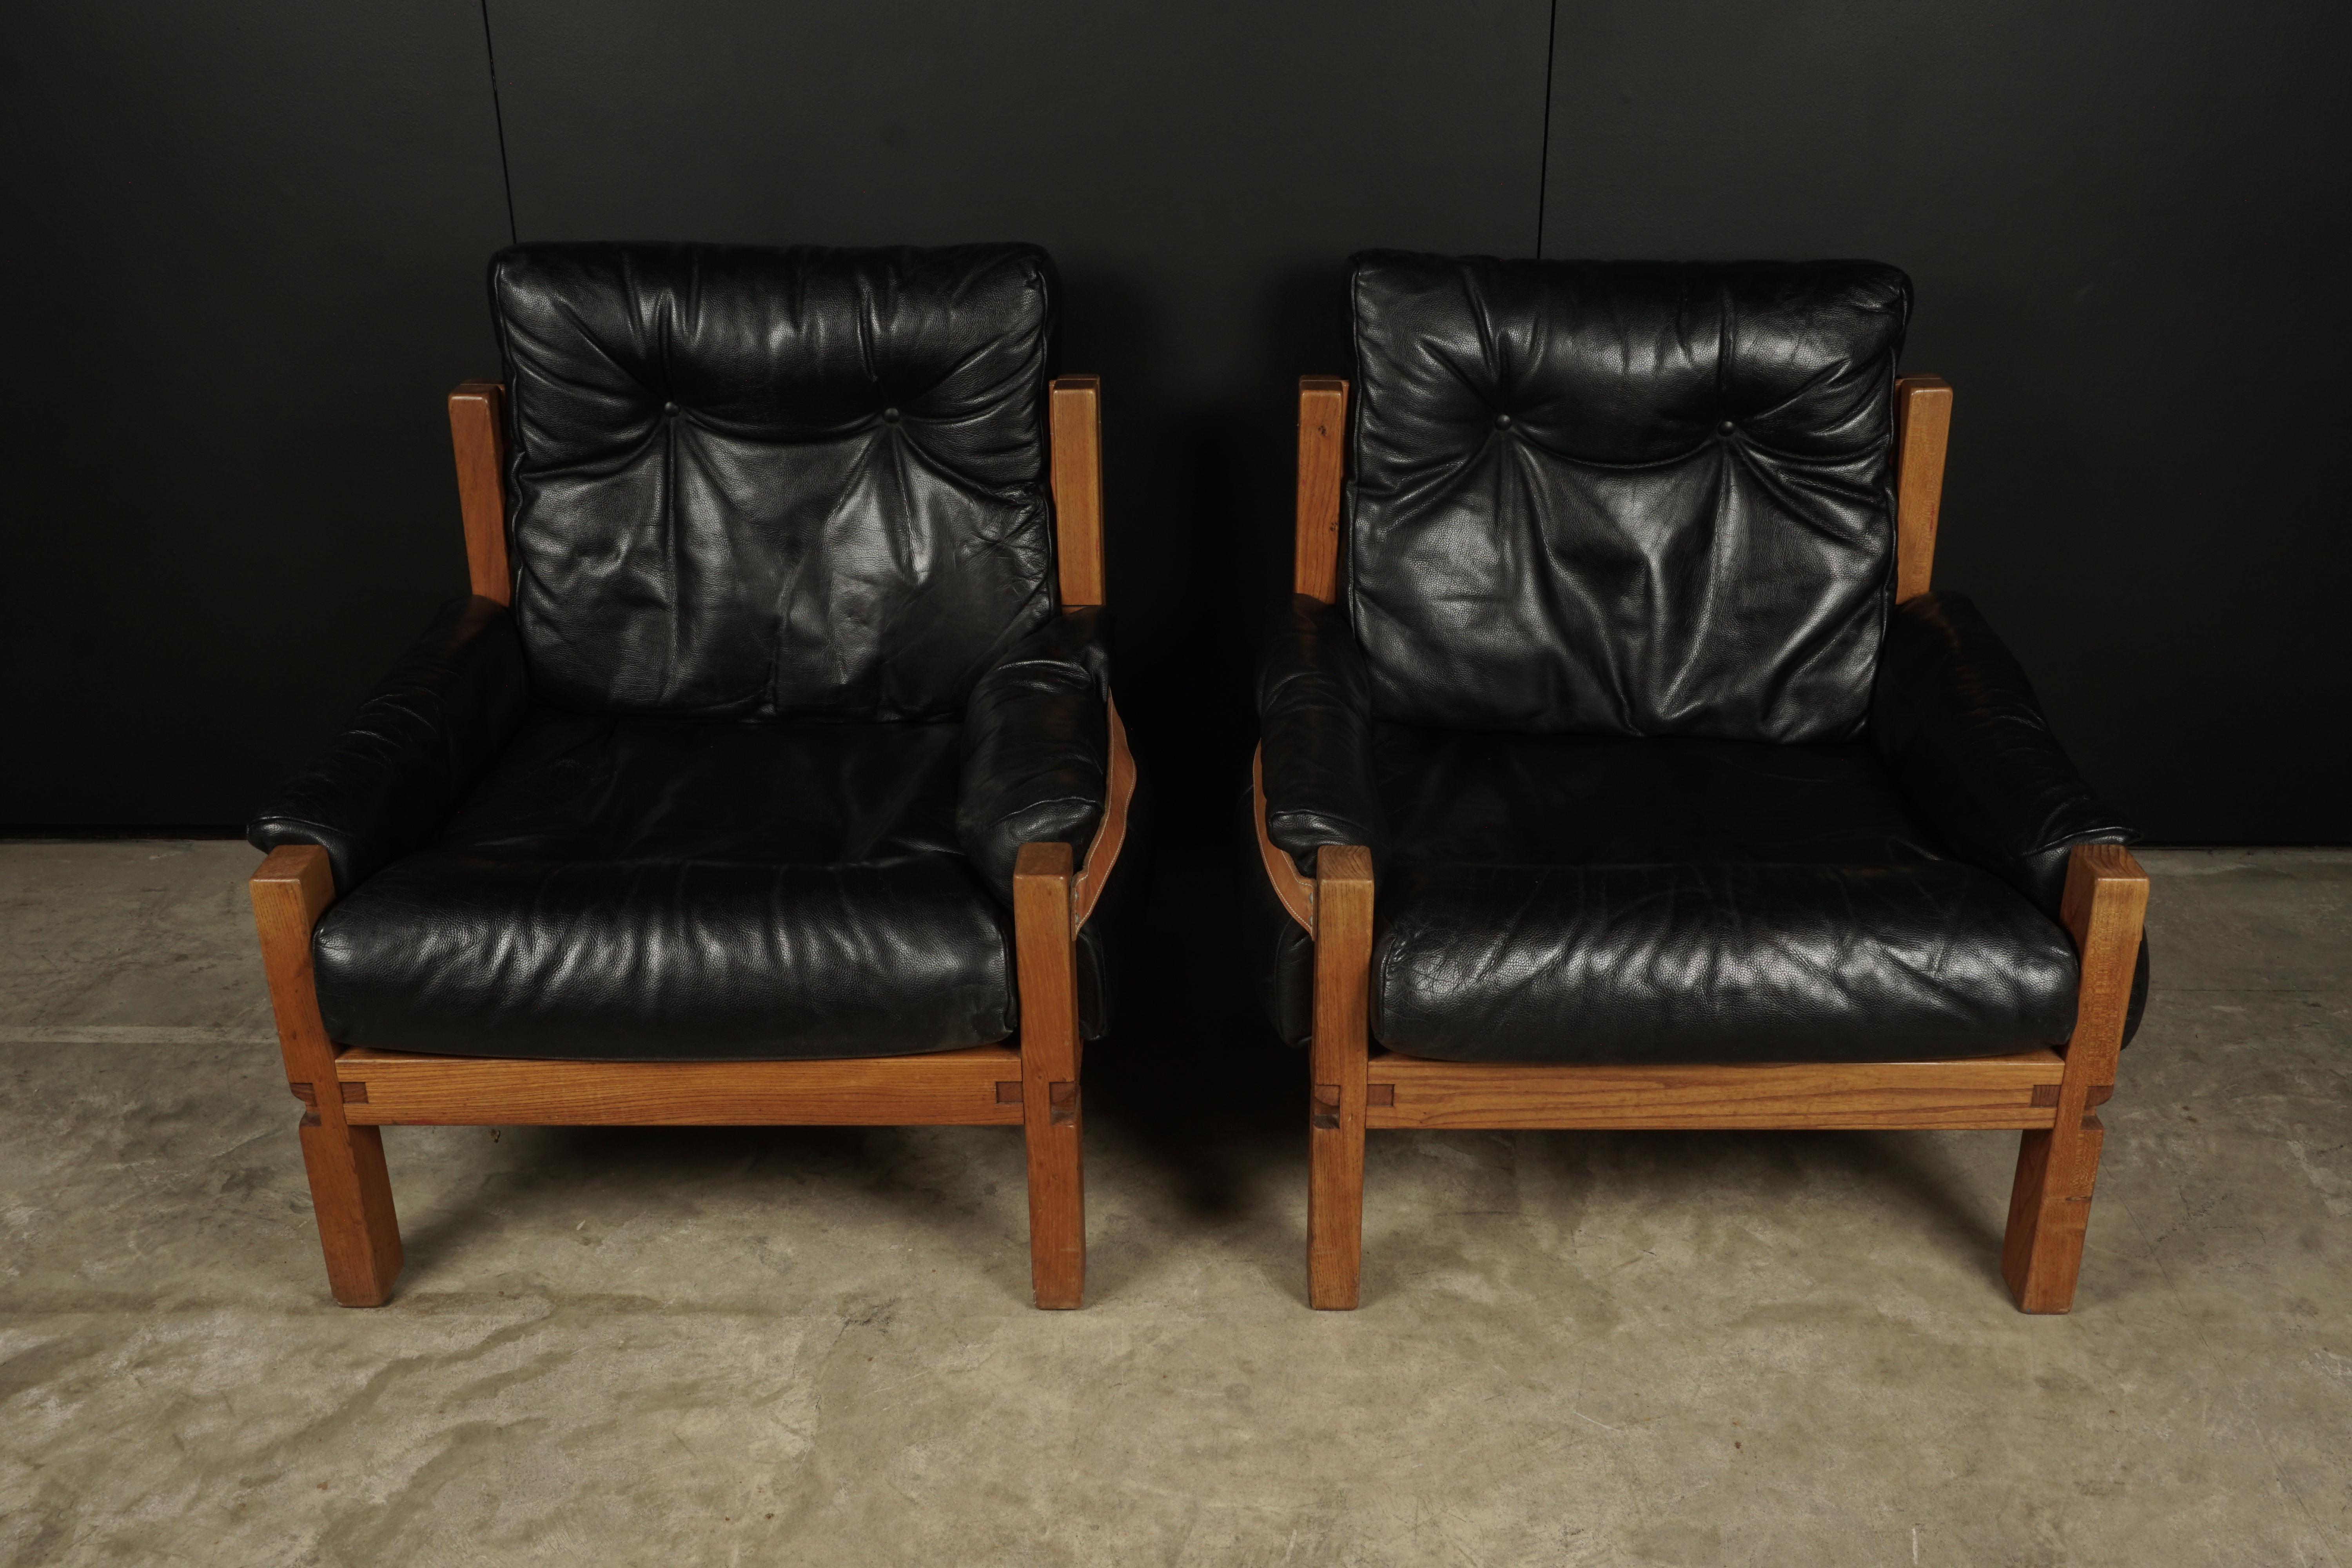 Vintage leather lounge chairs designed by Pierre Chapo, France, 1950s. Solid elm construction with cognac leather straps. Black leather cushions with light patina and wear. Superb quality.
  